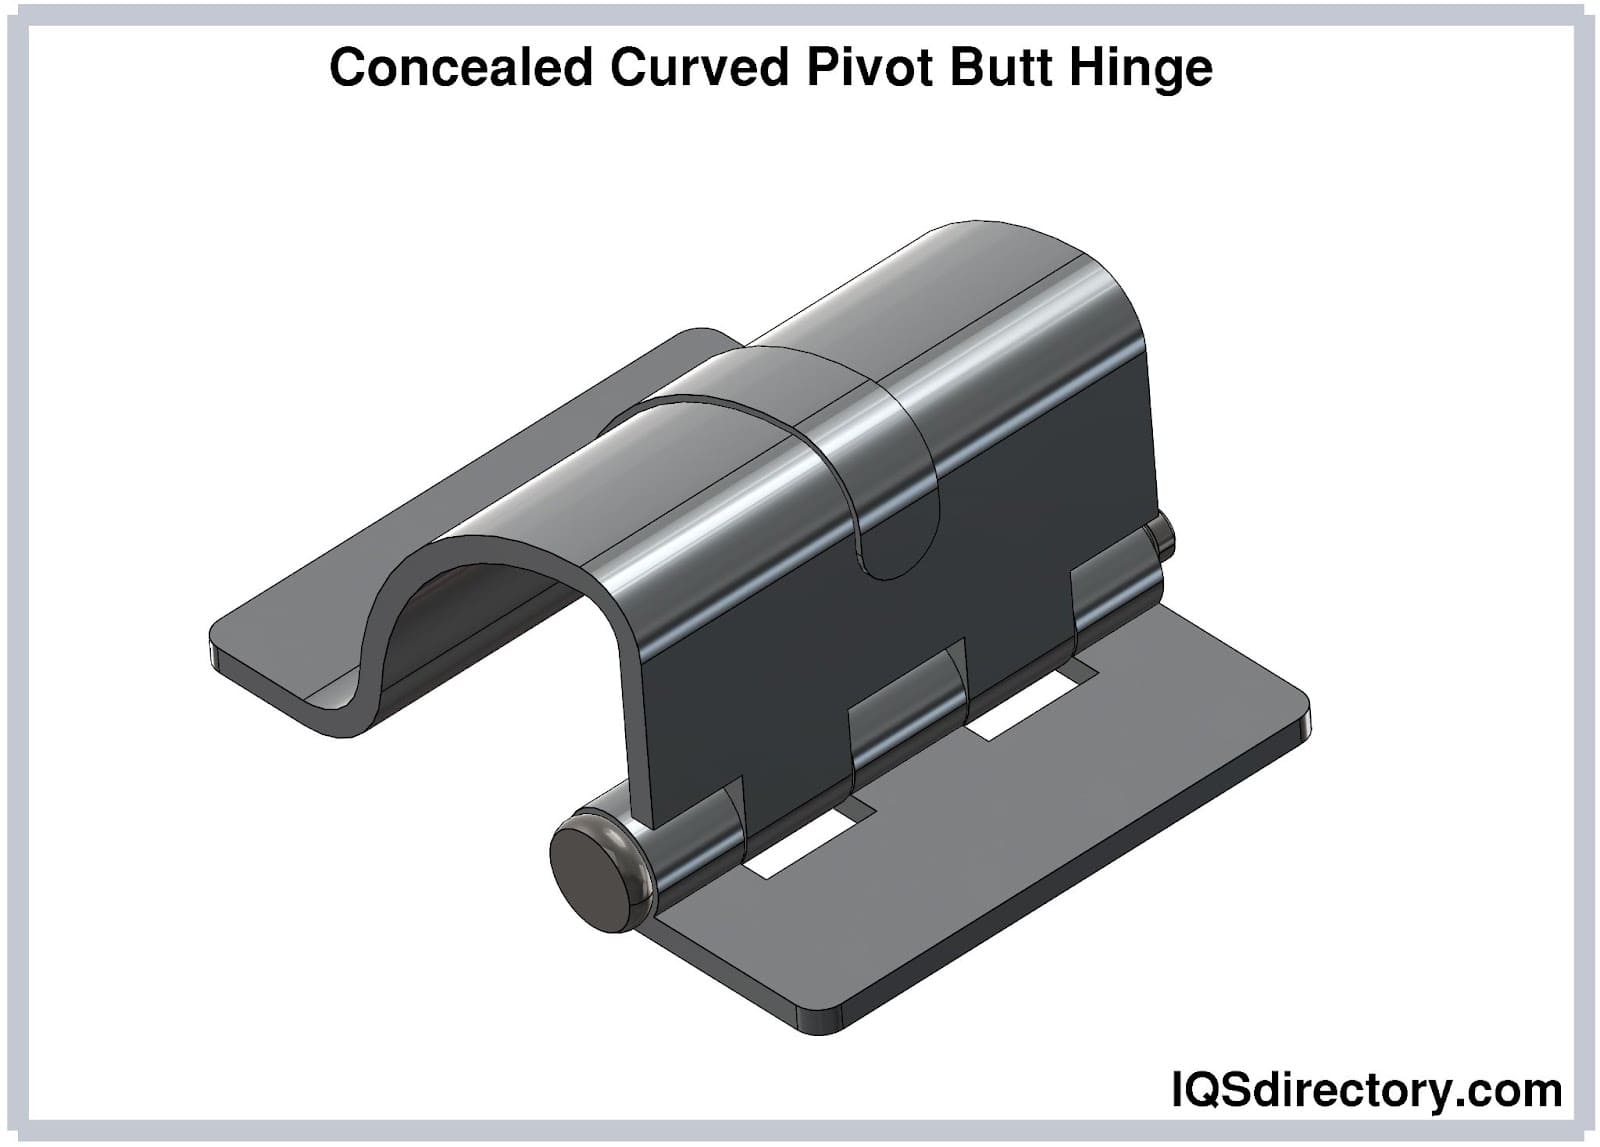 Concealed Curved Pivot Butt Hinge